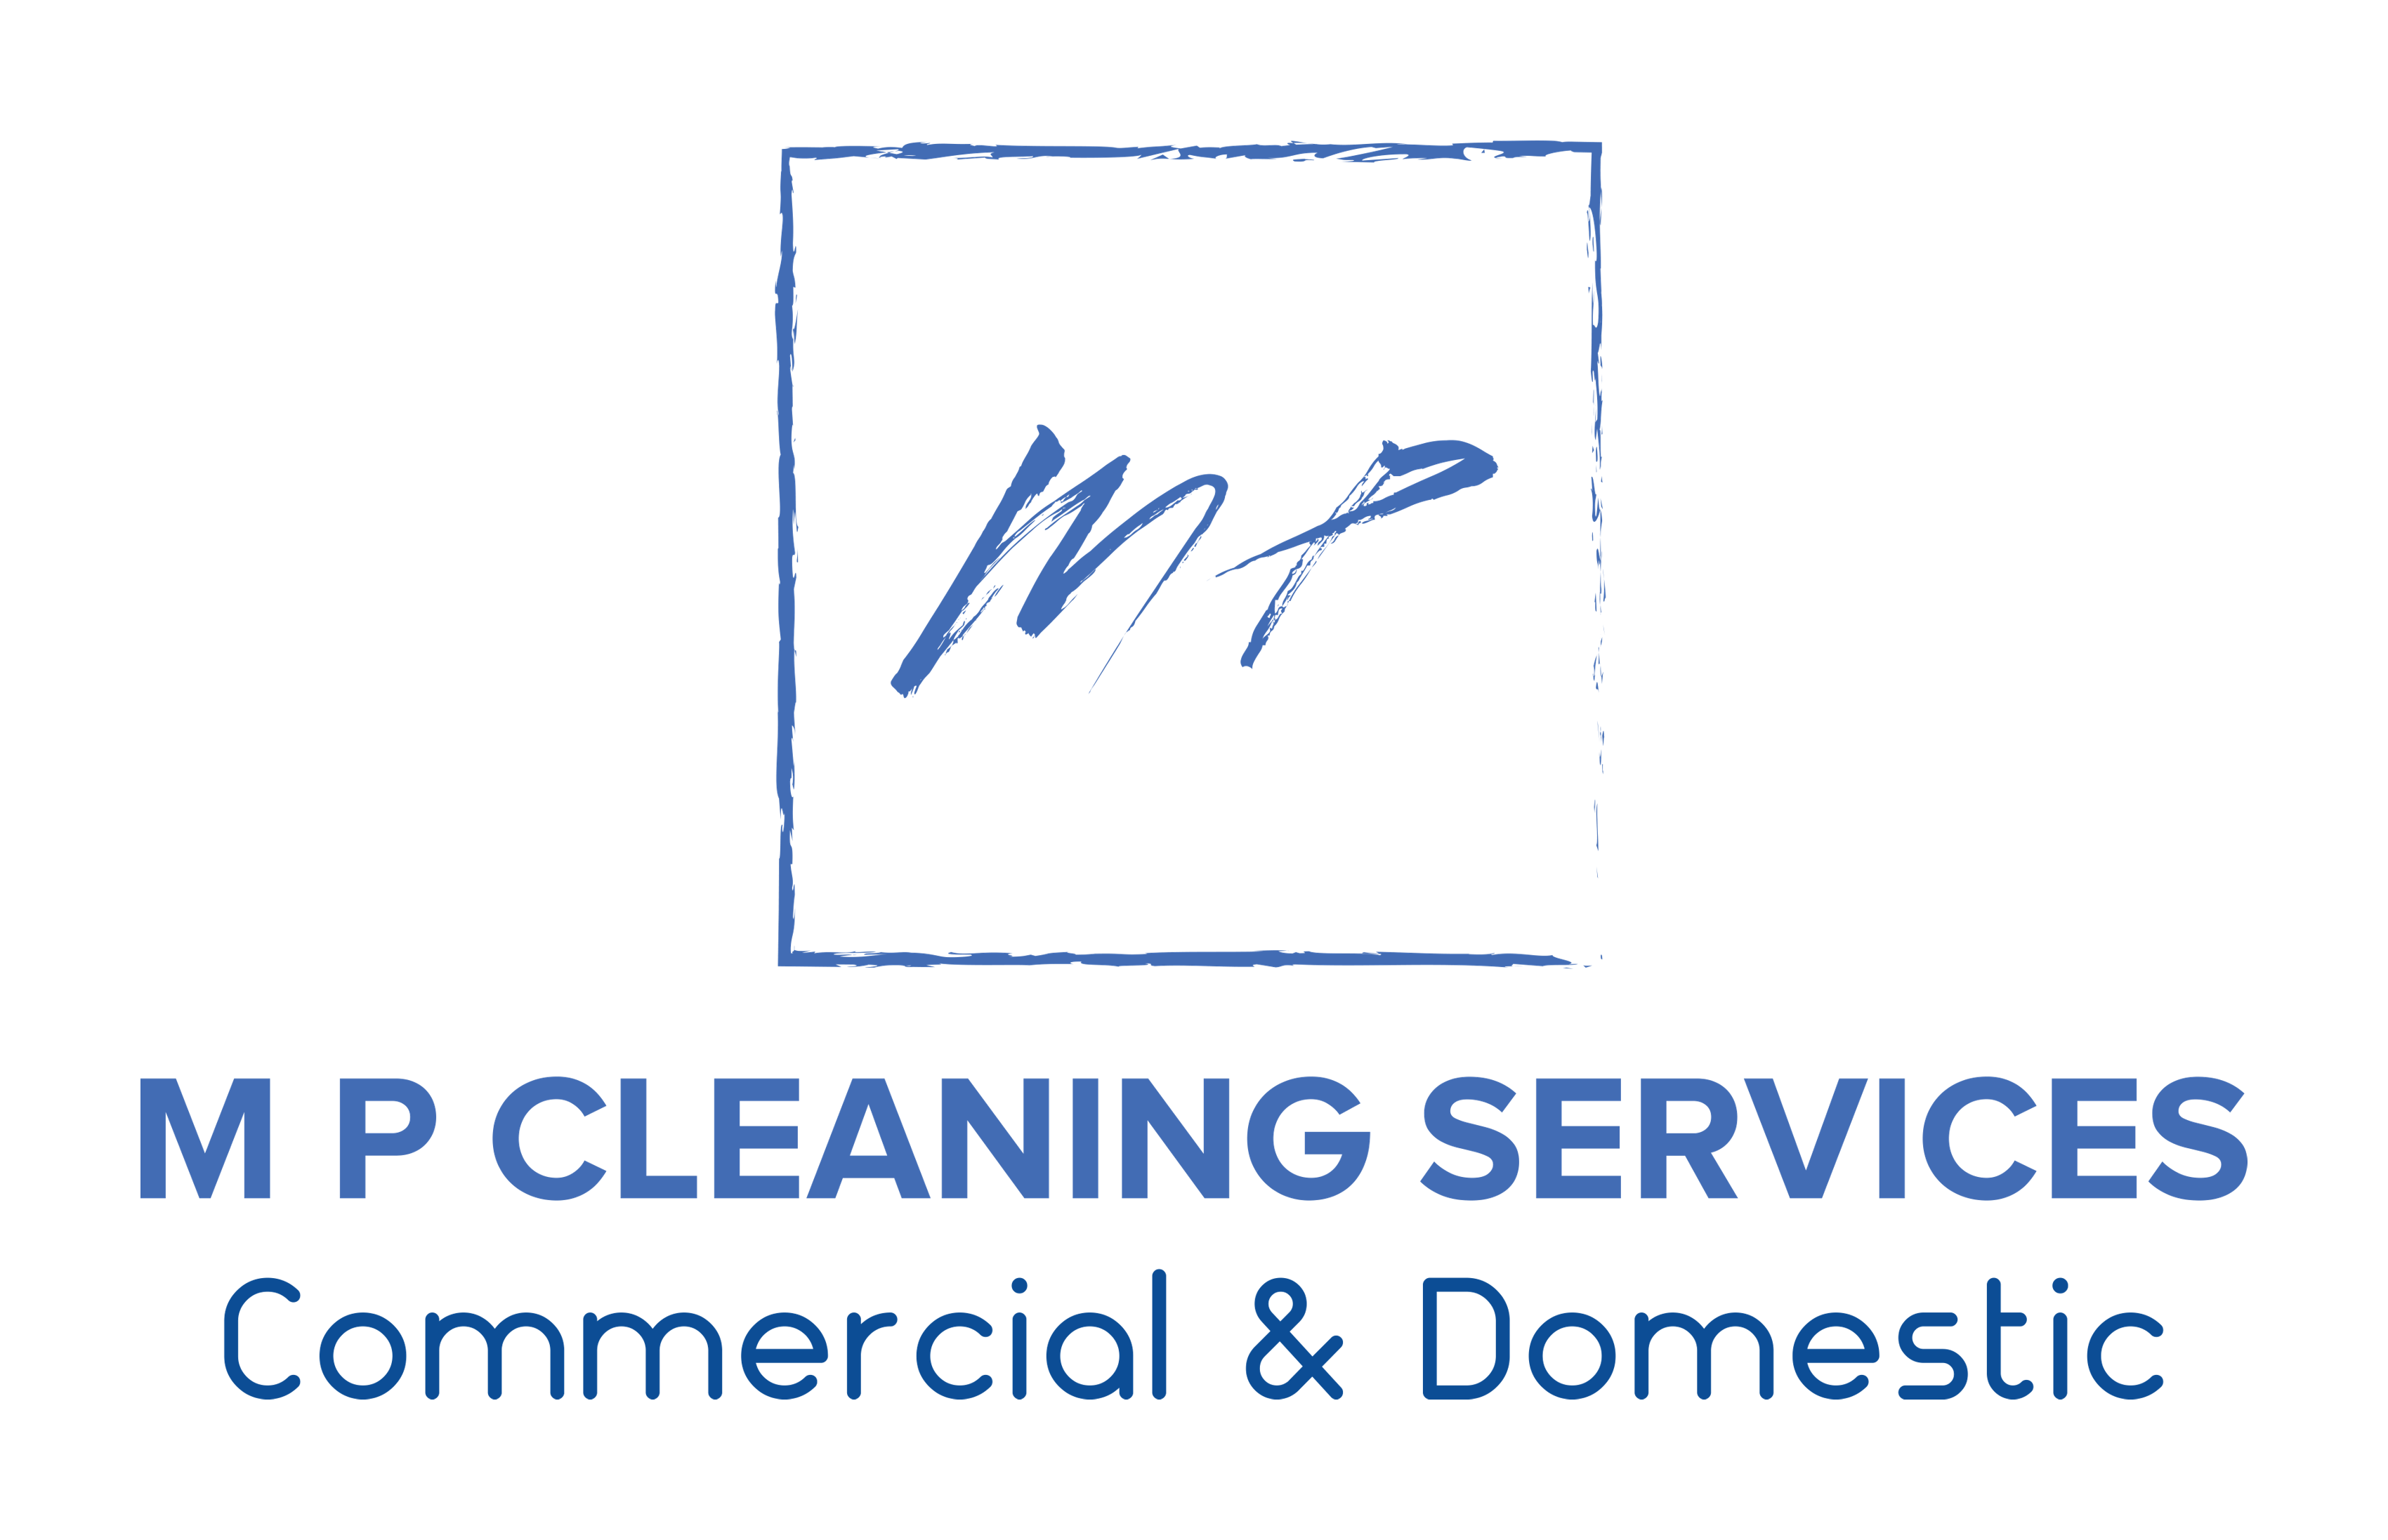 MP Cleaning services